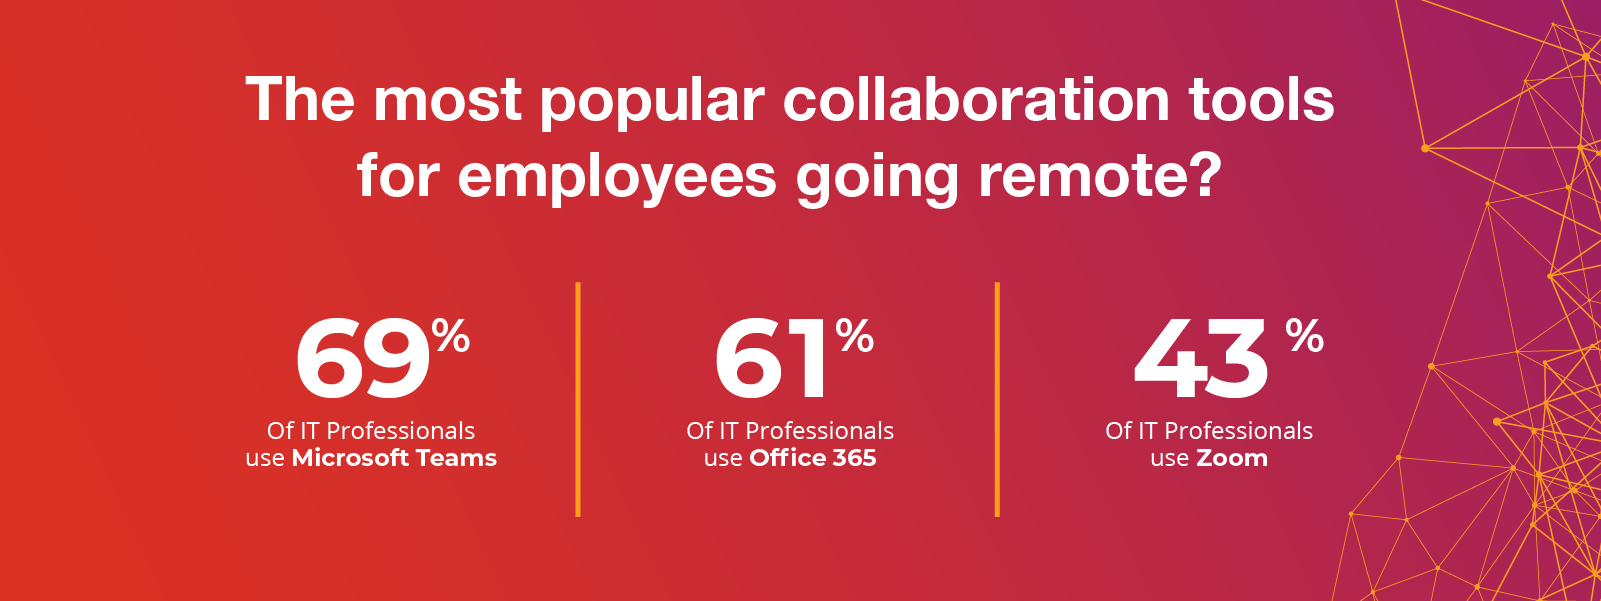 The most popular collaboration tools for employees going remote? 